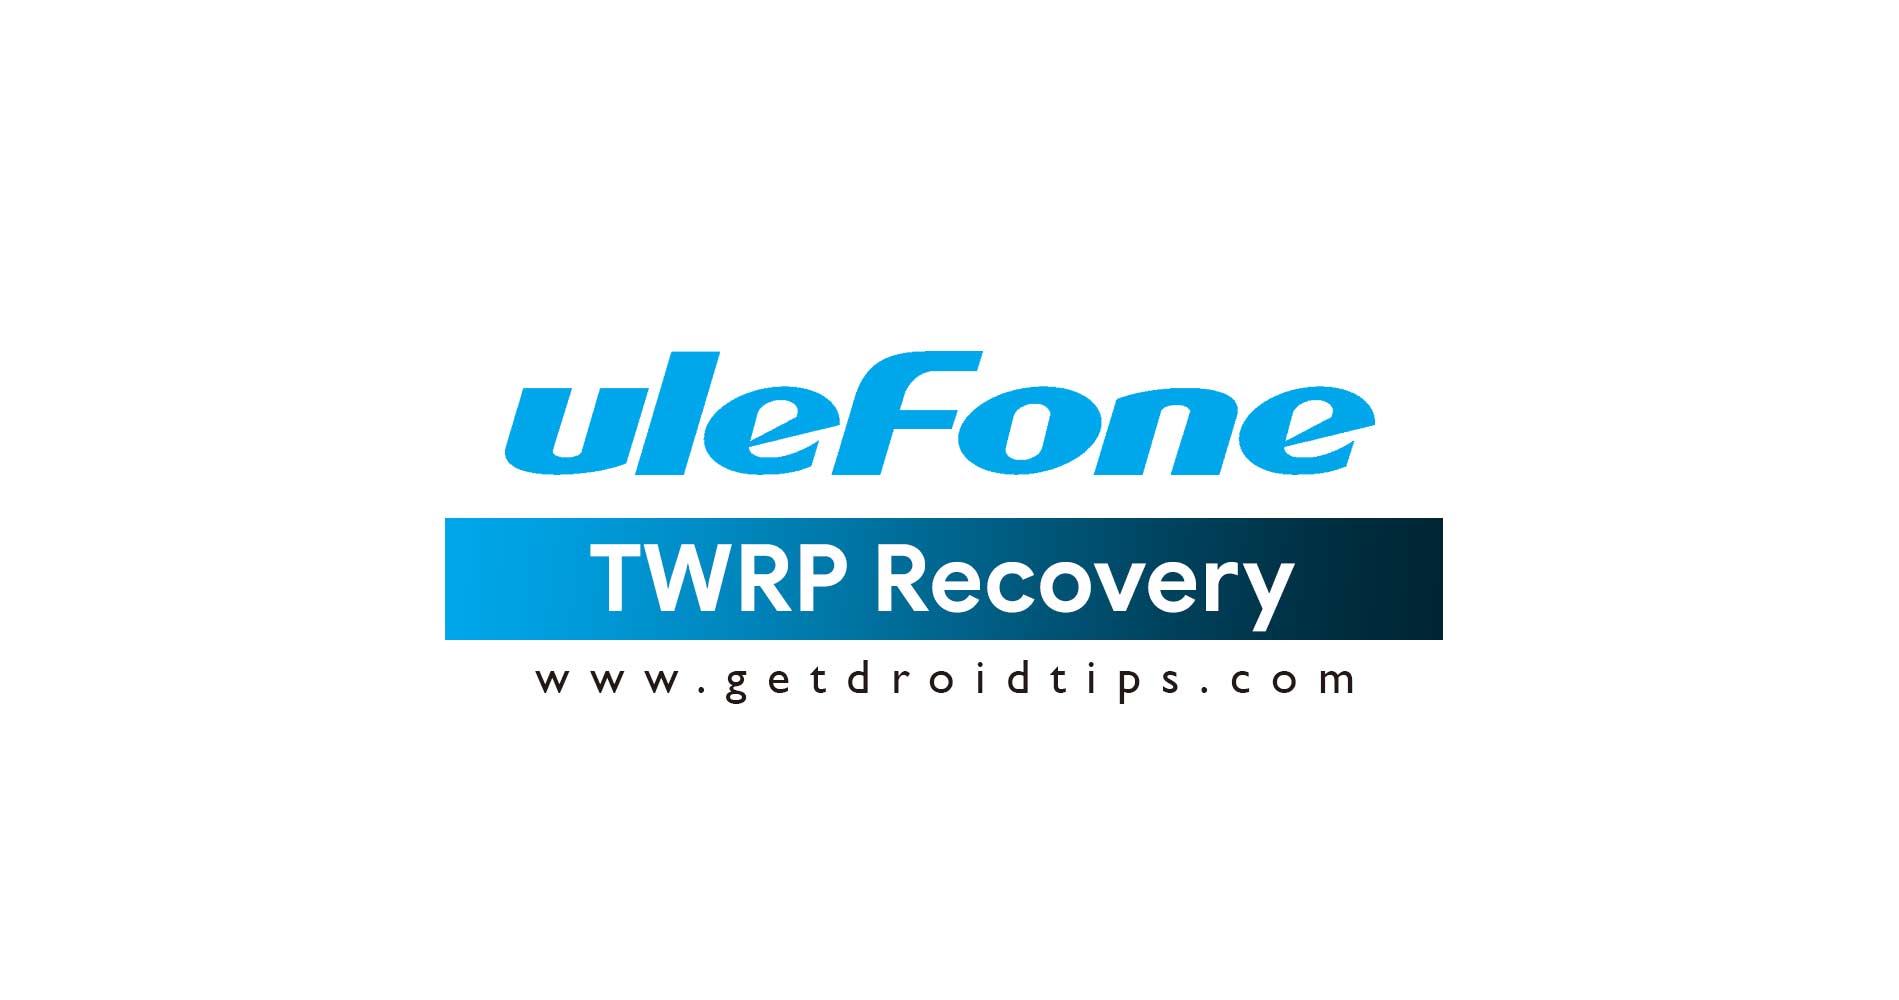 List Of Supported TWRP Recovery For Ulefone Devices